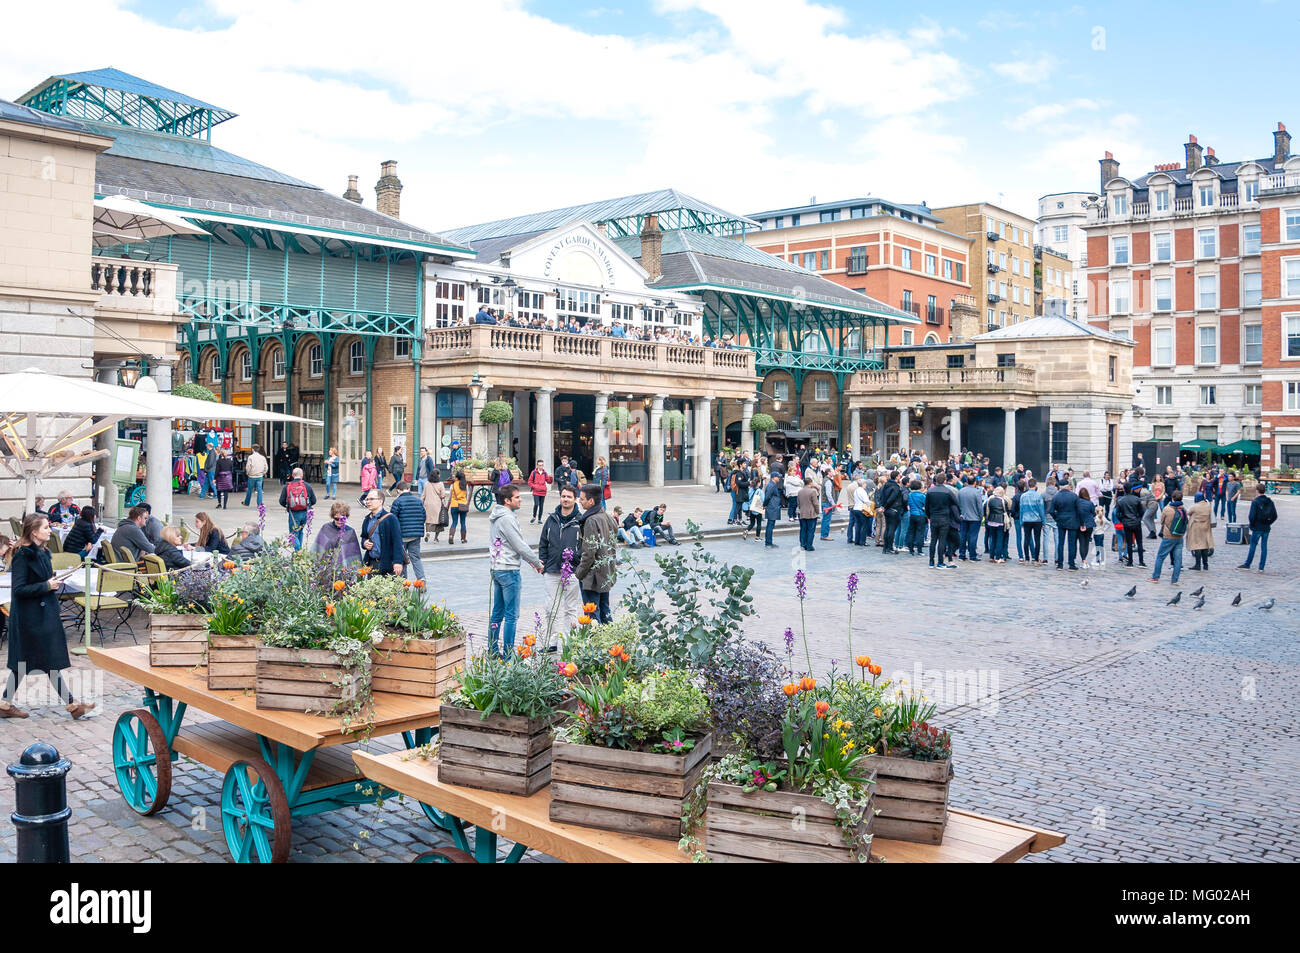 Covent Garden Market Square, Covent Garden, City of Westminster, Greater London, England, United Kingdom Stock Photo